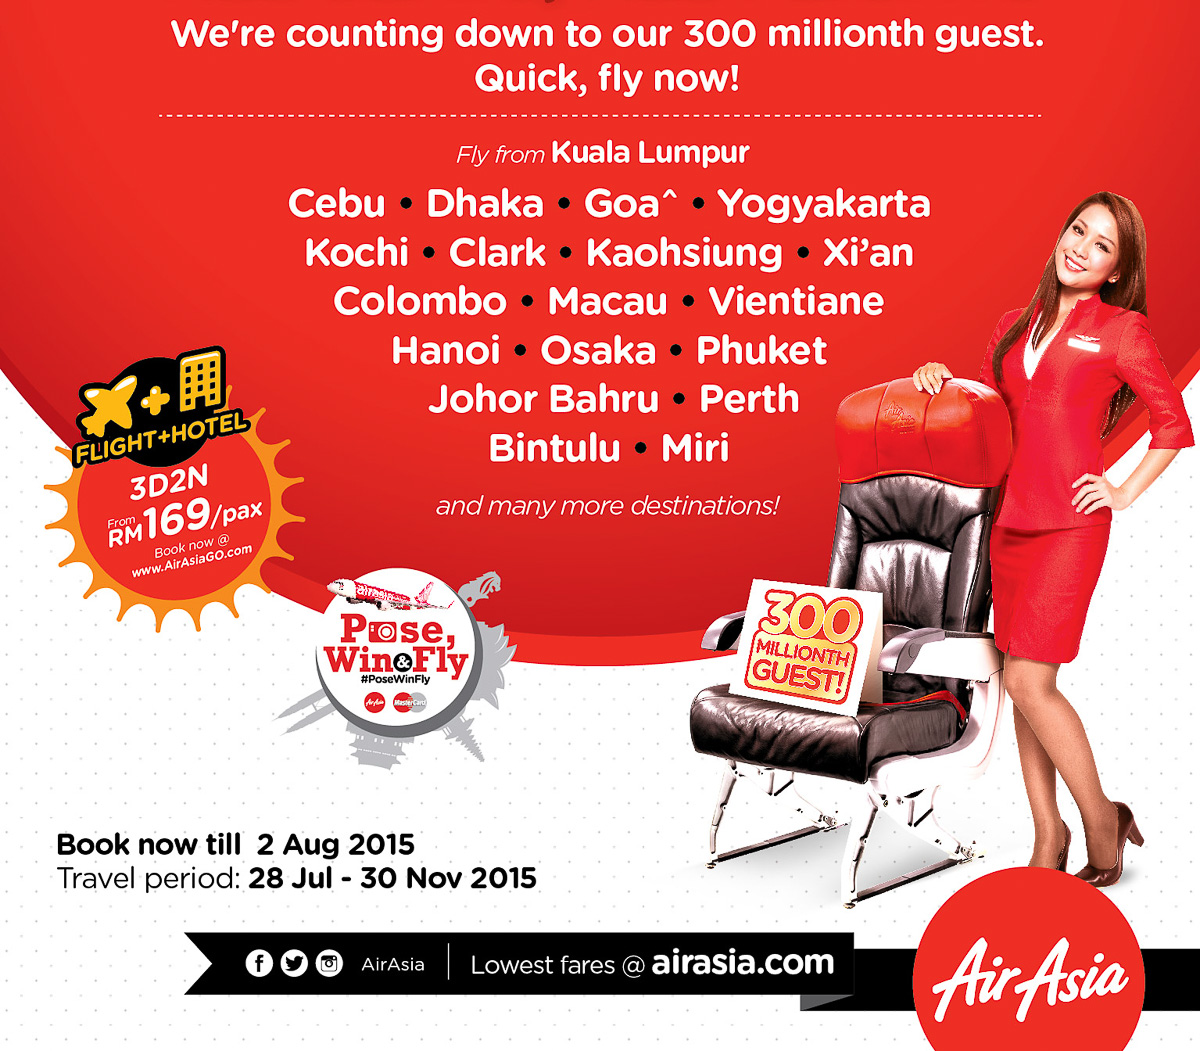 Are you AirAsia’s 300 millionth guest?